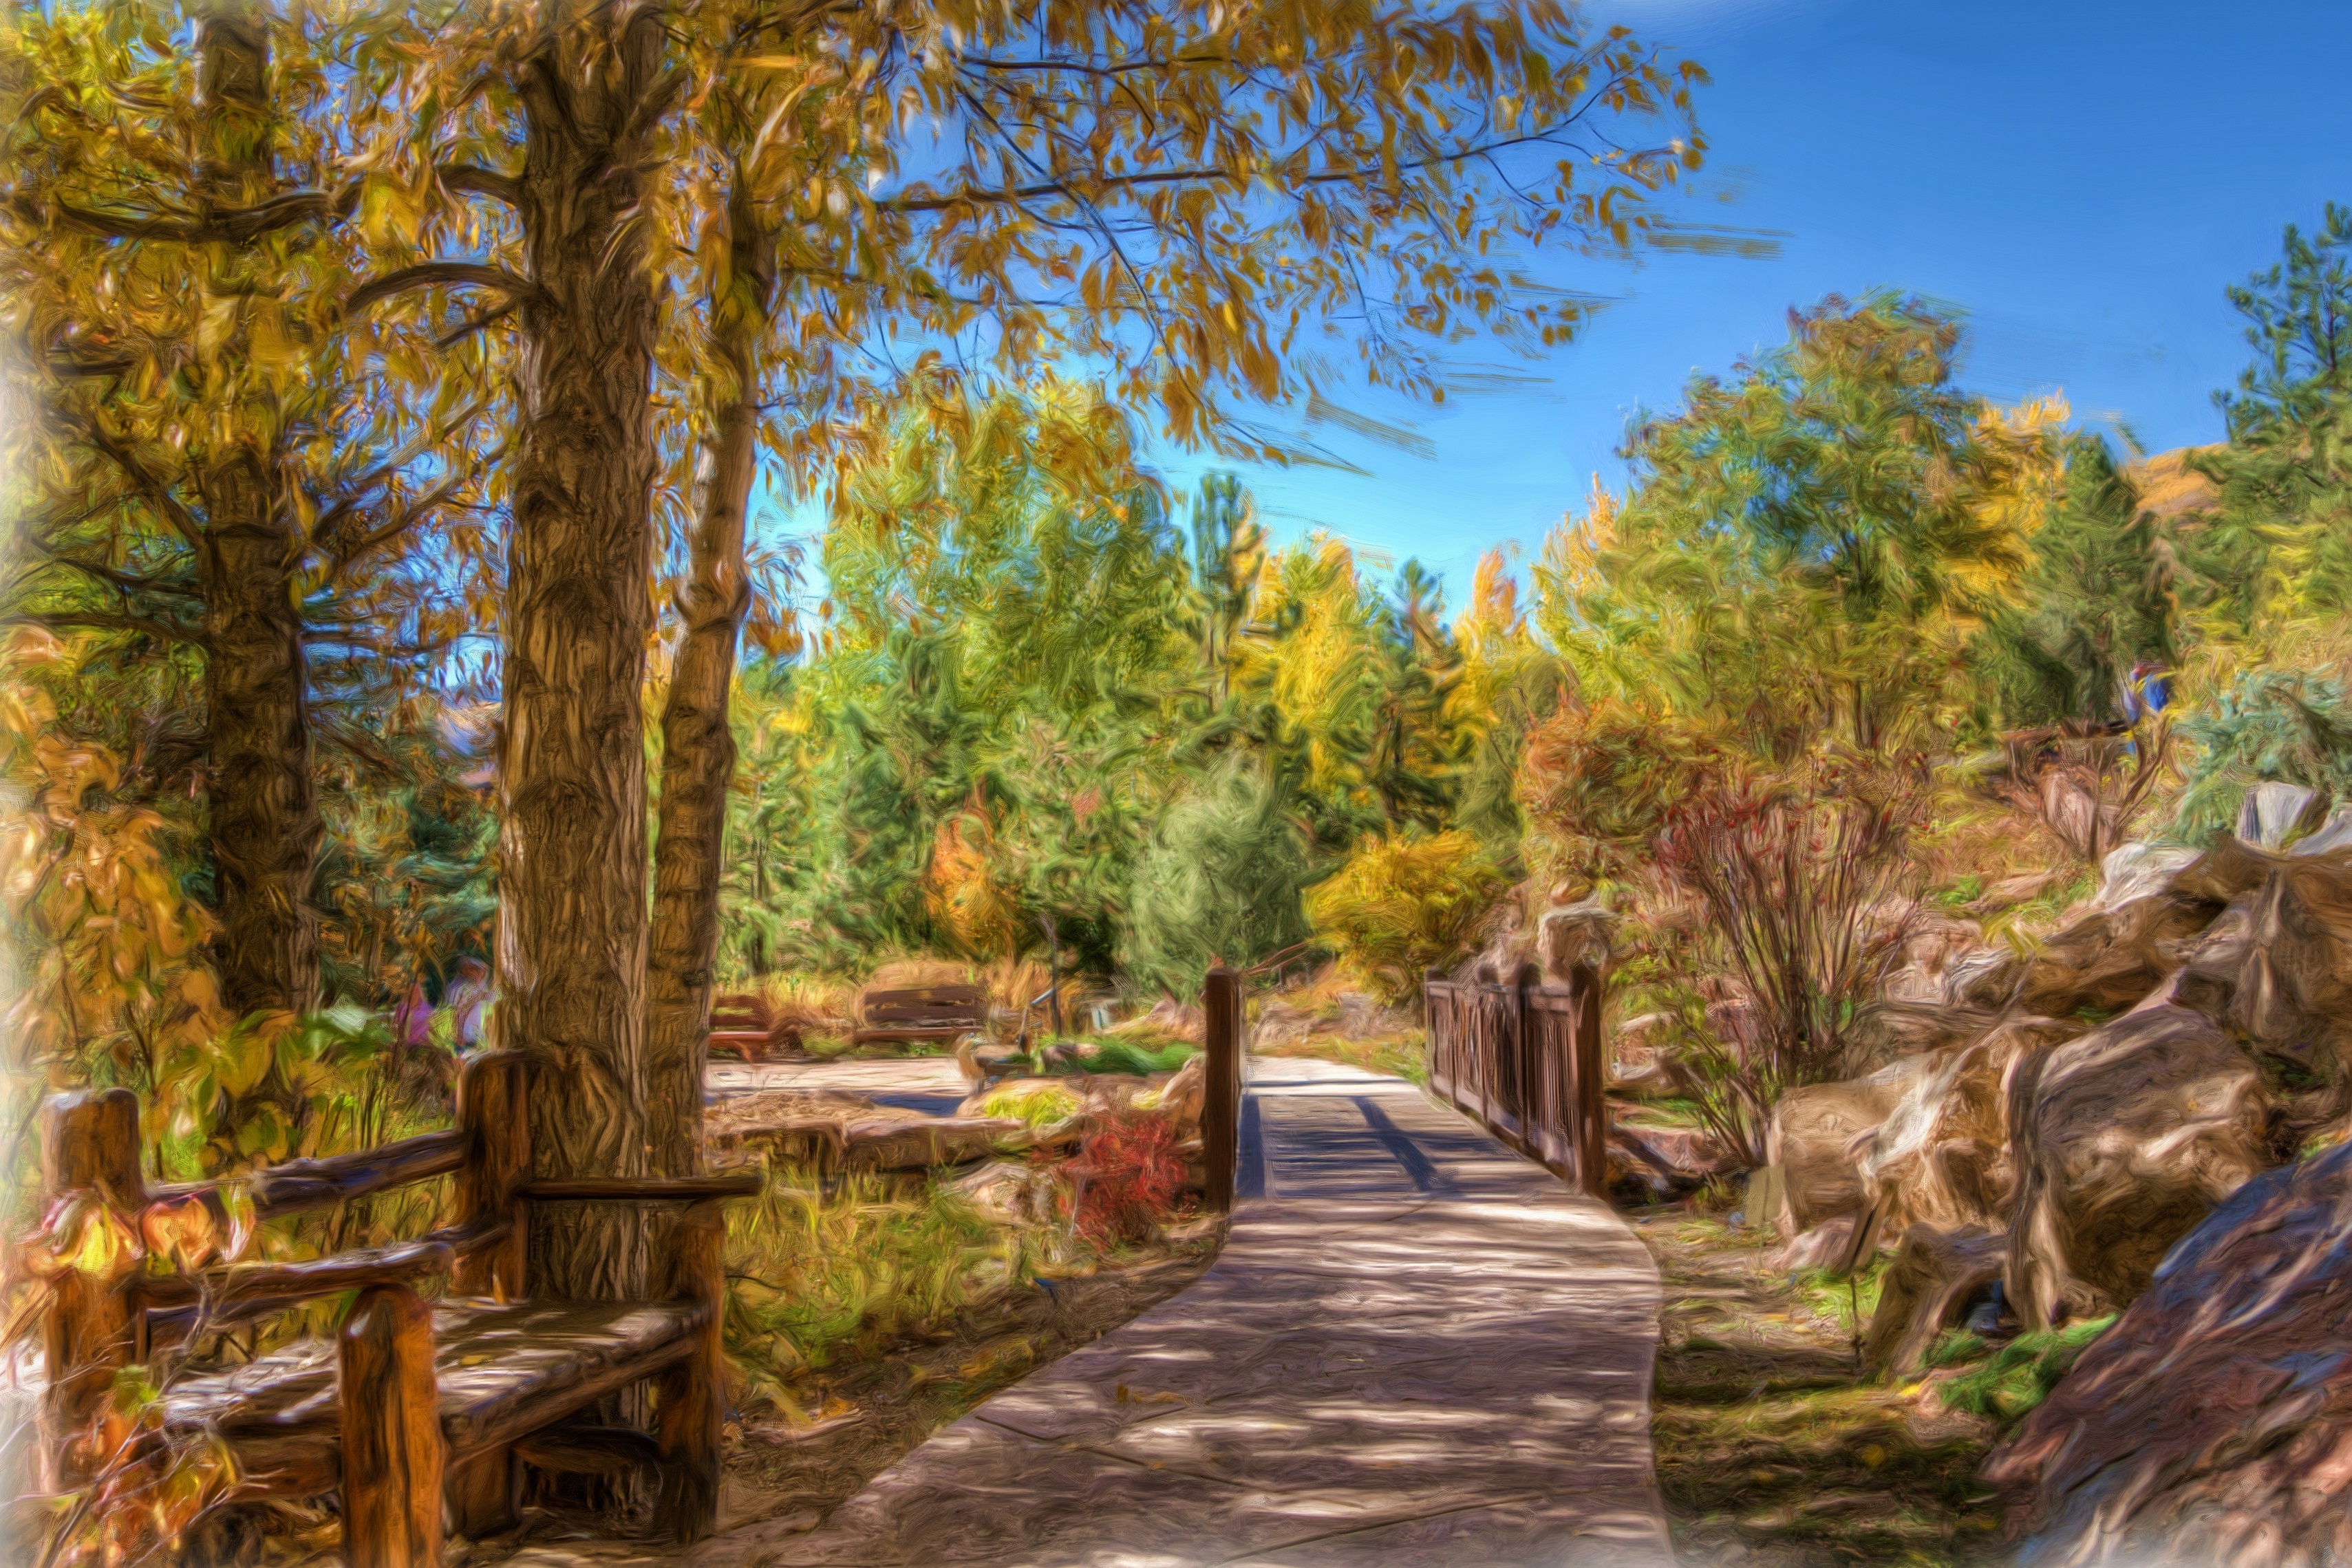 artistic, park, bench, colorado, landscape, oil painting, painting, path, tree